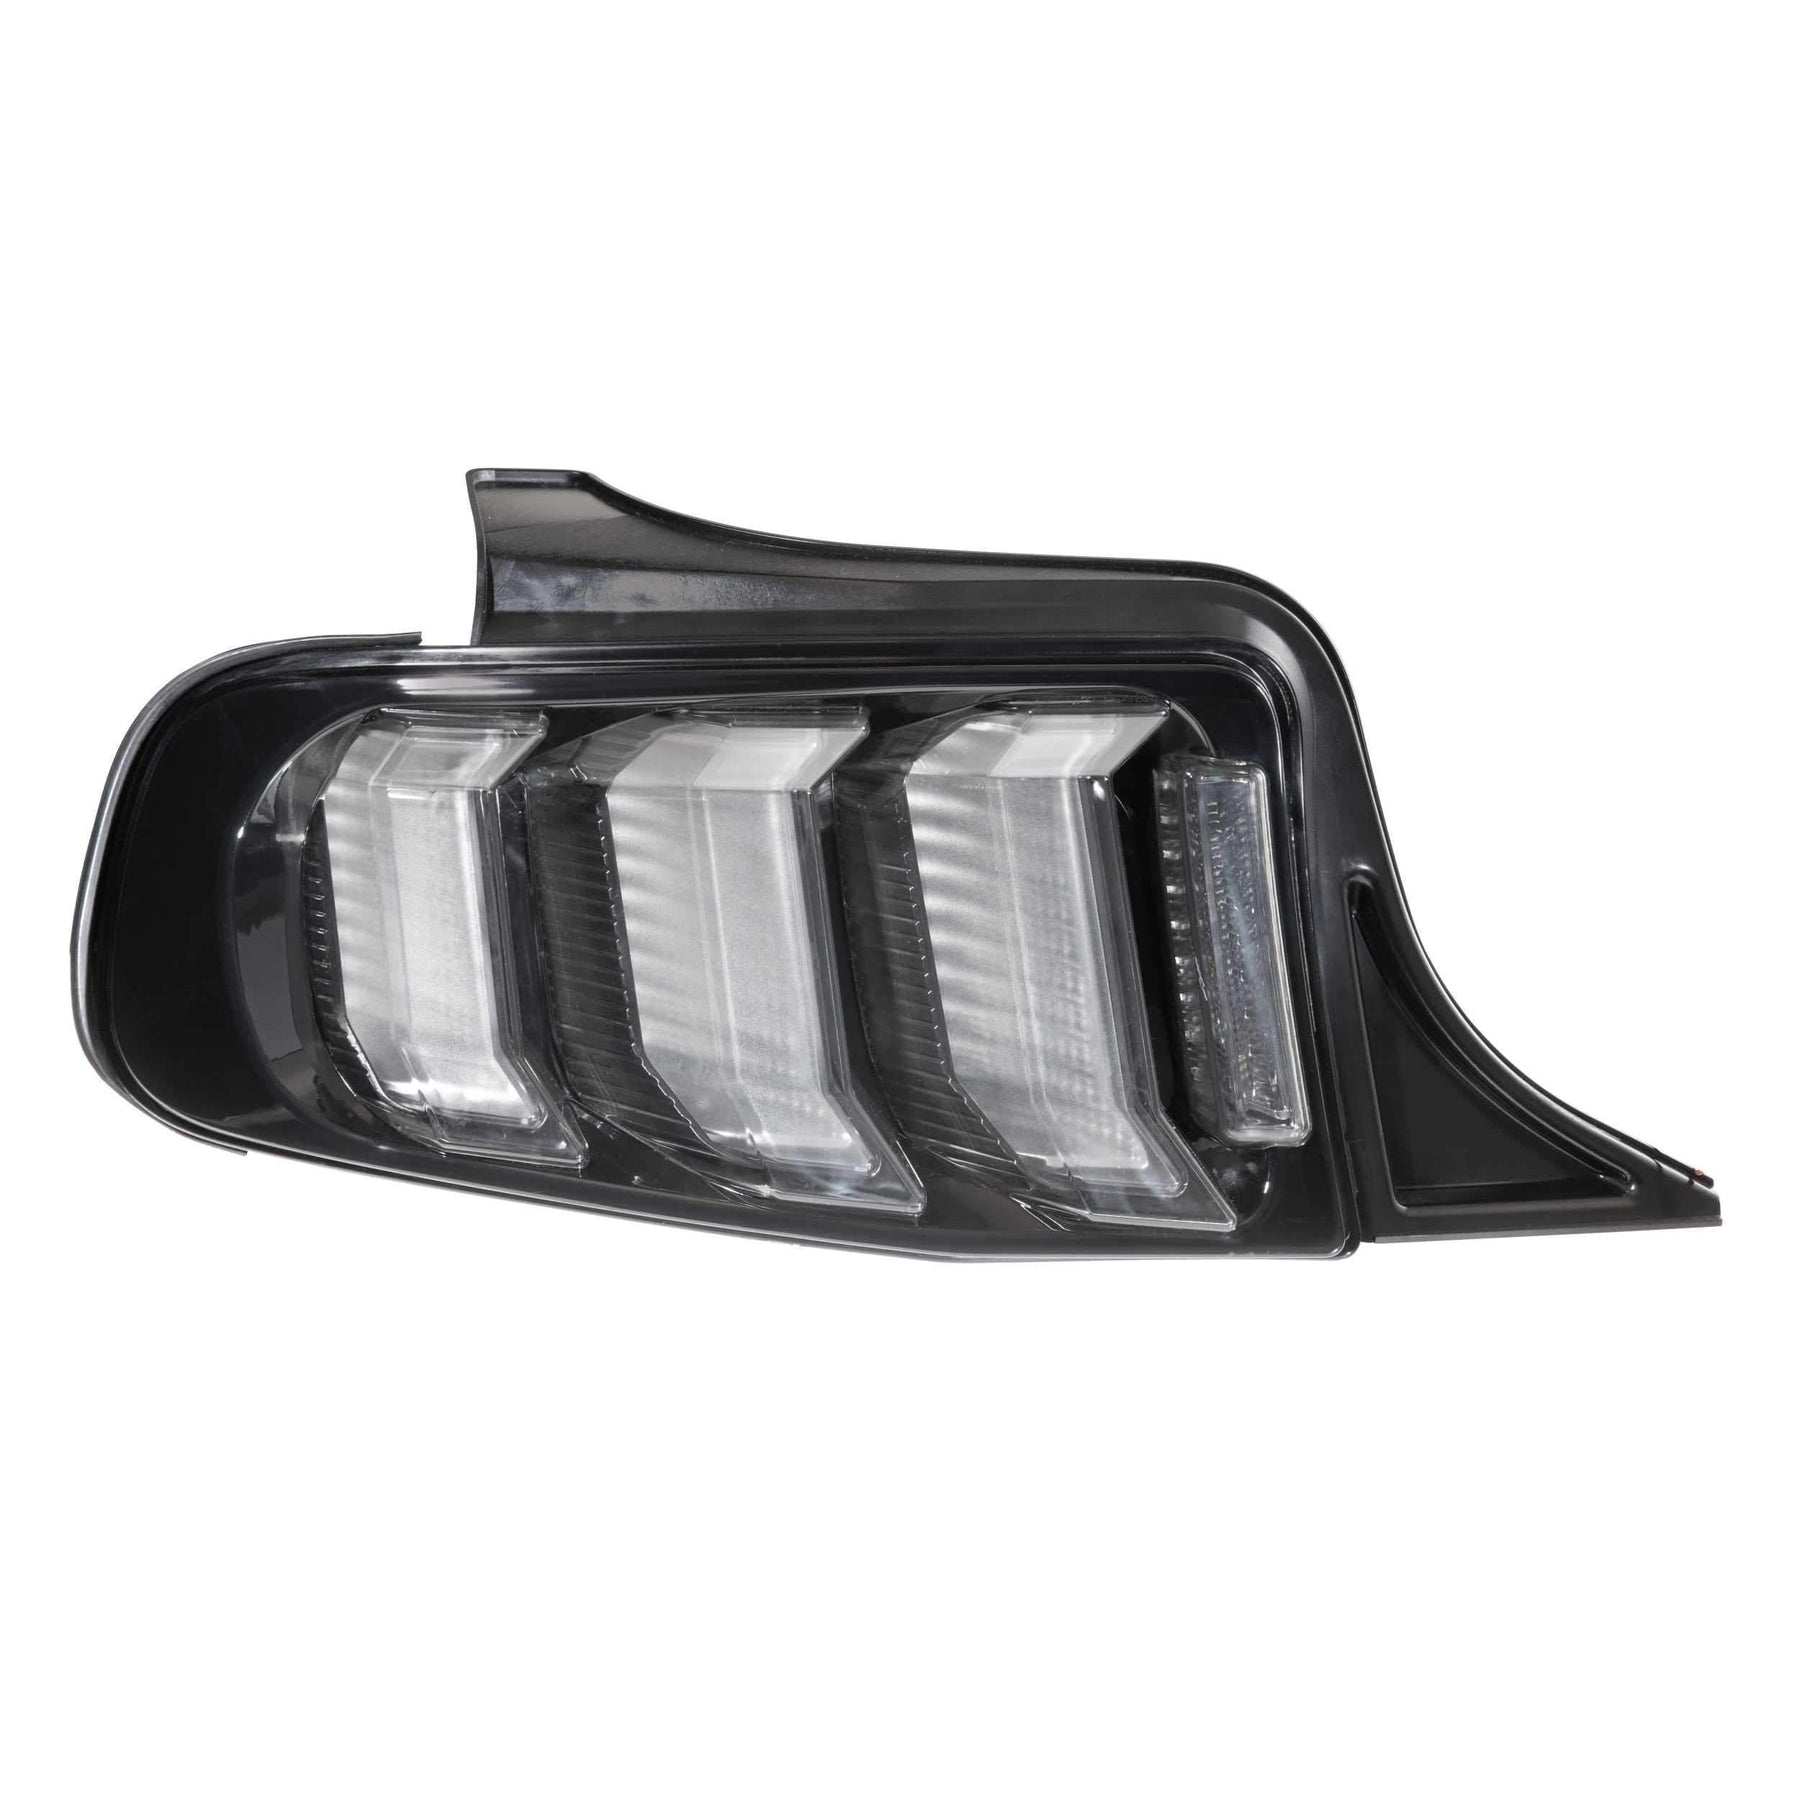 2013-2014 Mustang XB LED Smoked Tail Lights (LF422.2)-Tail Lights-Morimoto-Dirty Diesel Customs